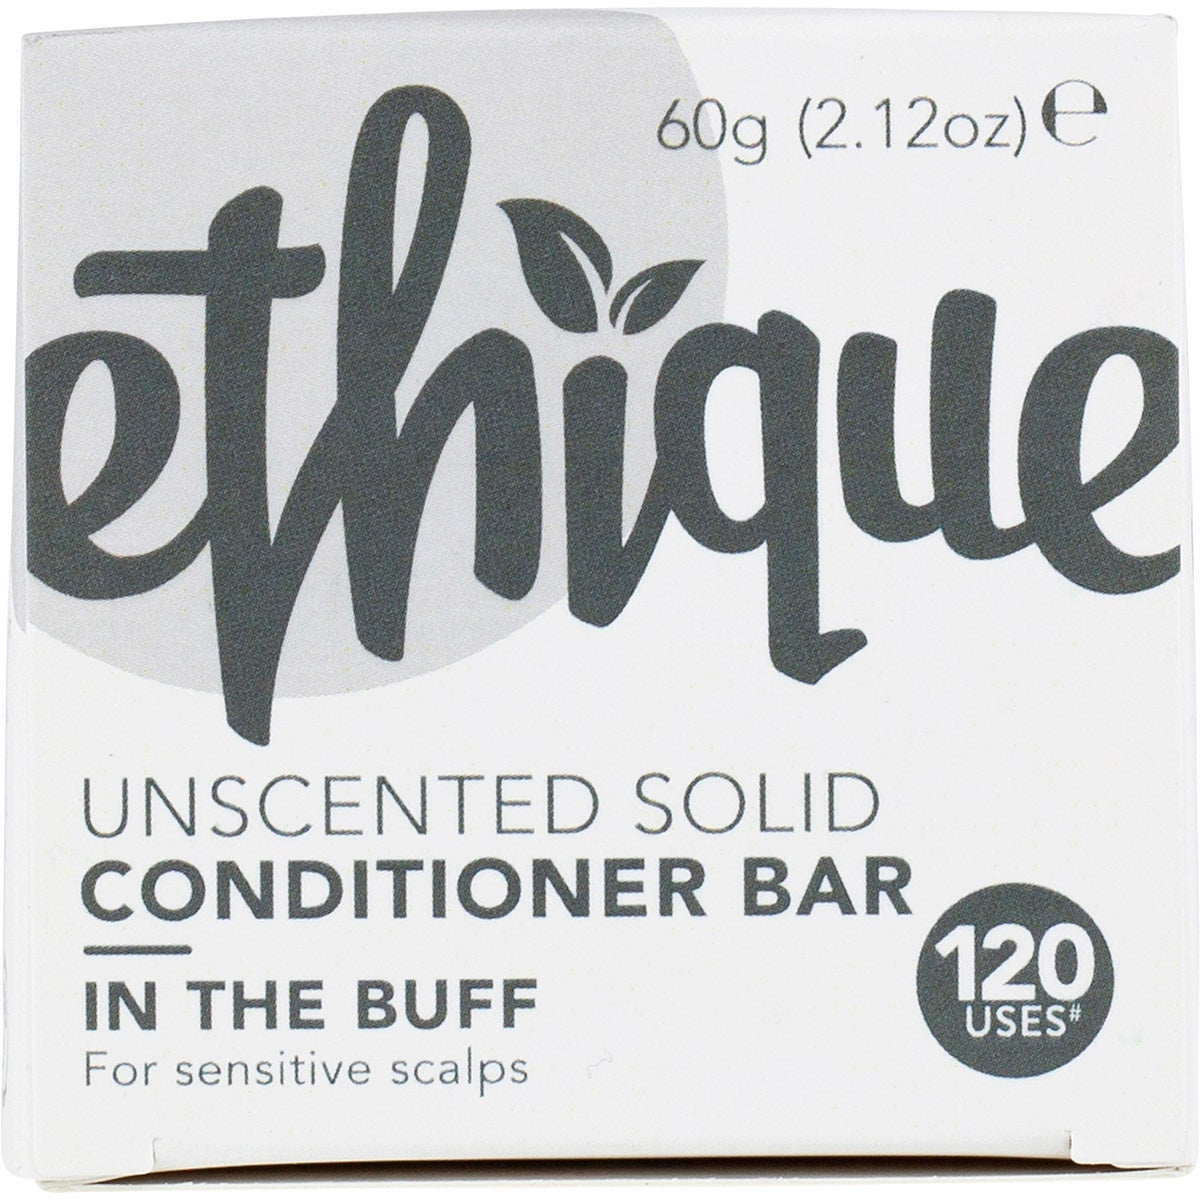 Ethique Solid Conditioner Bar In The Buff Unscented 60g